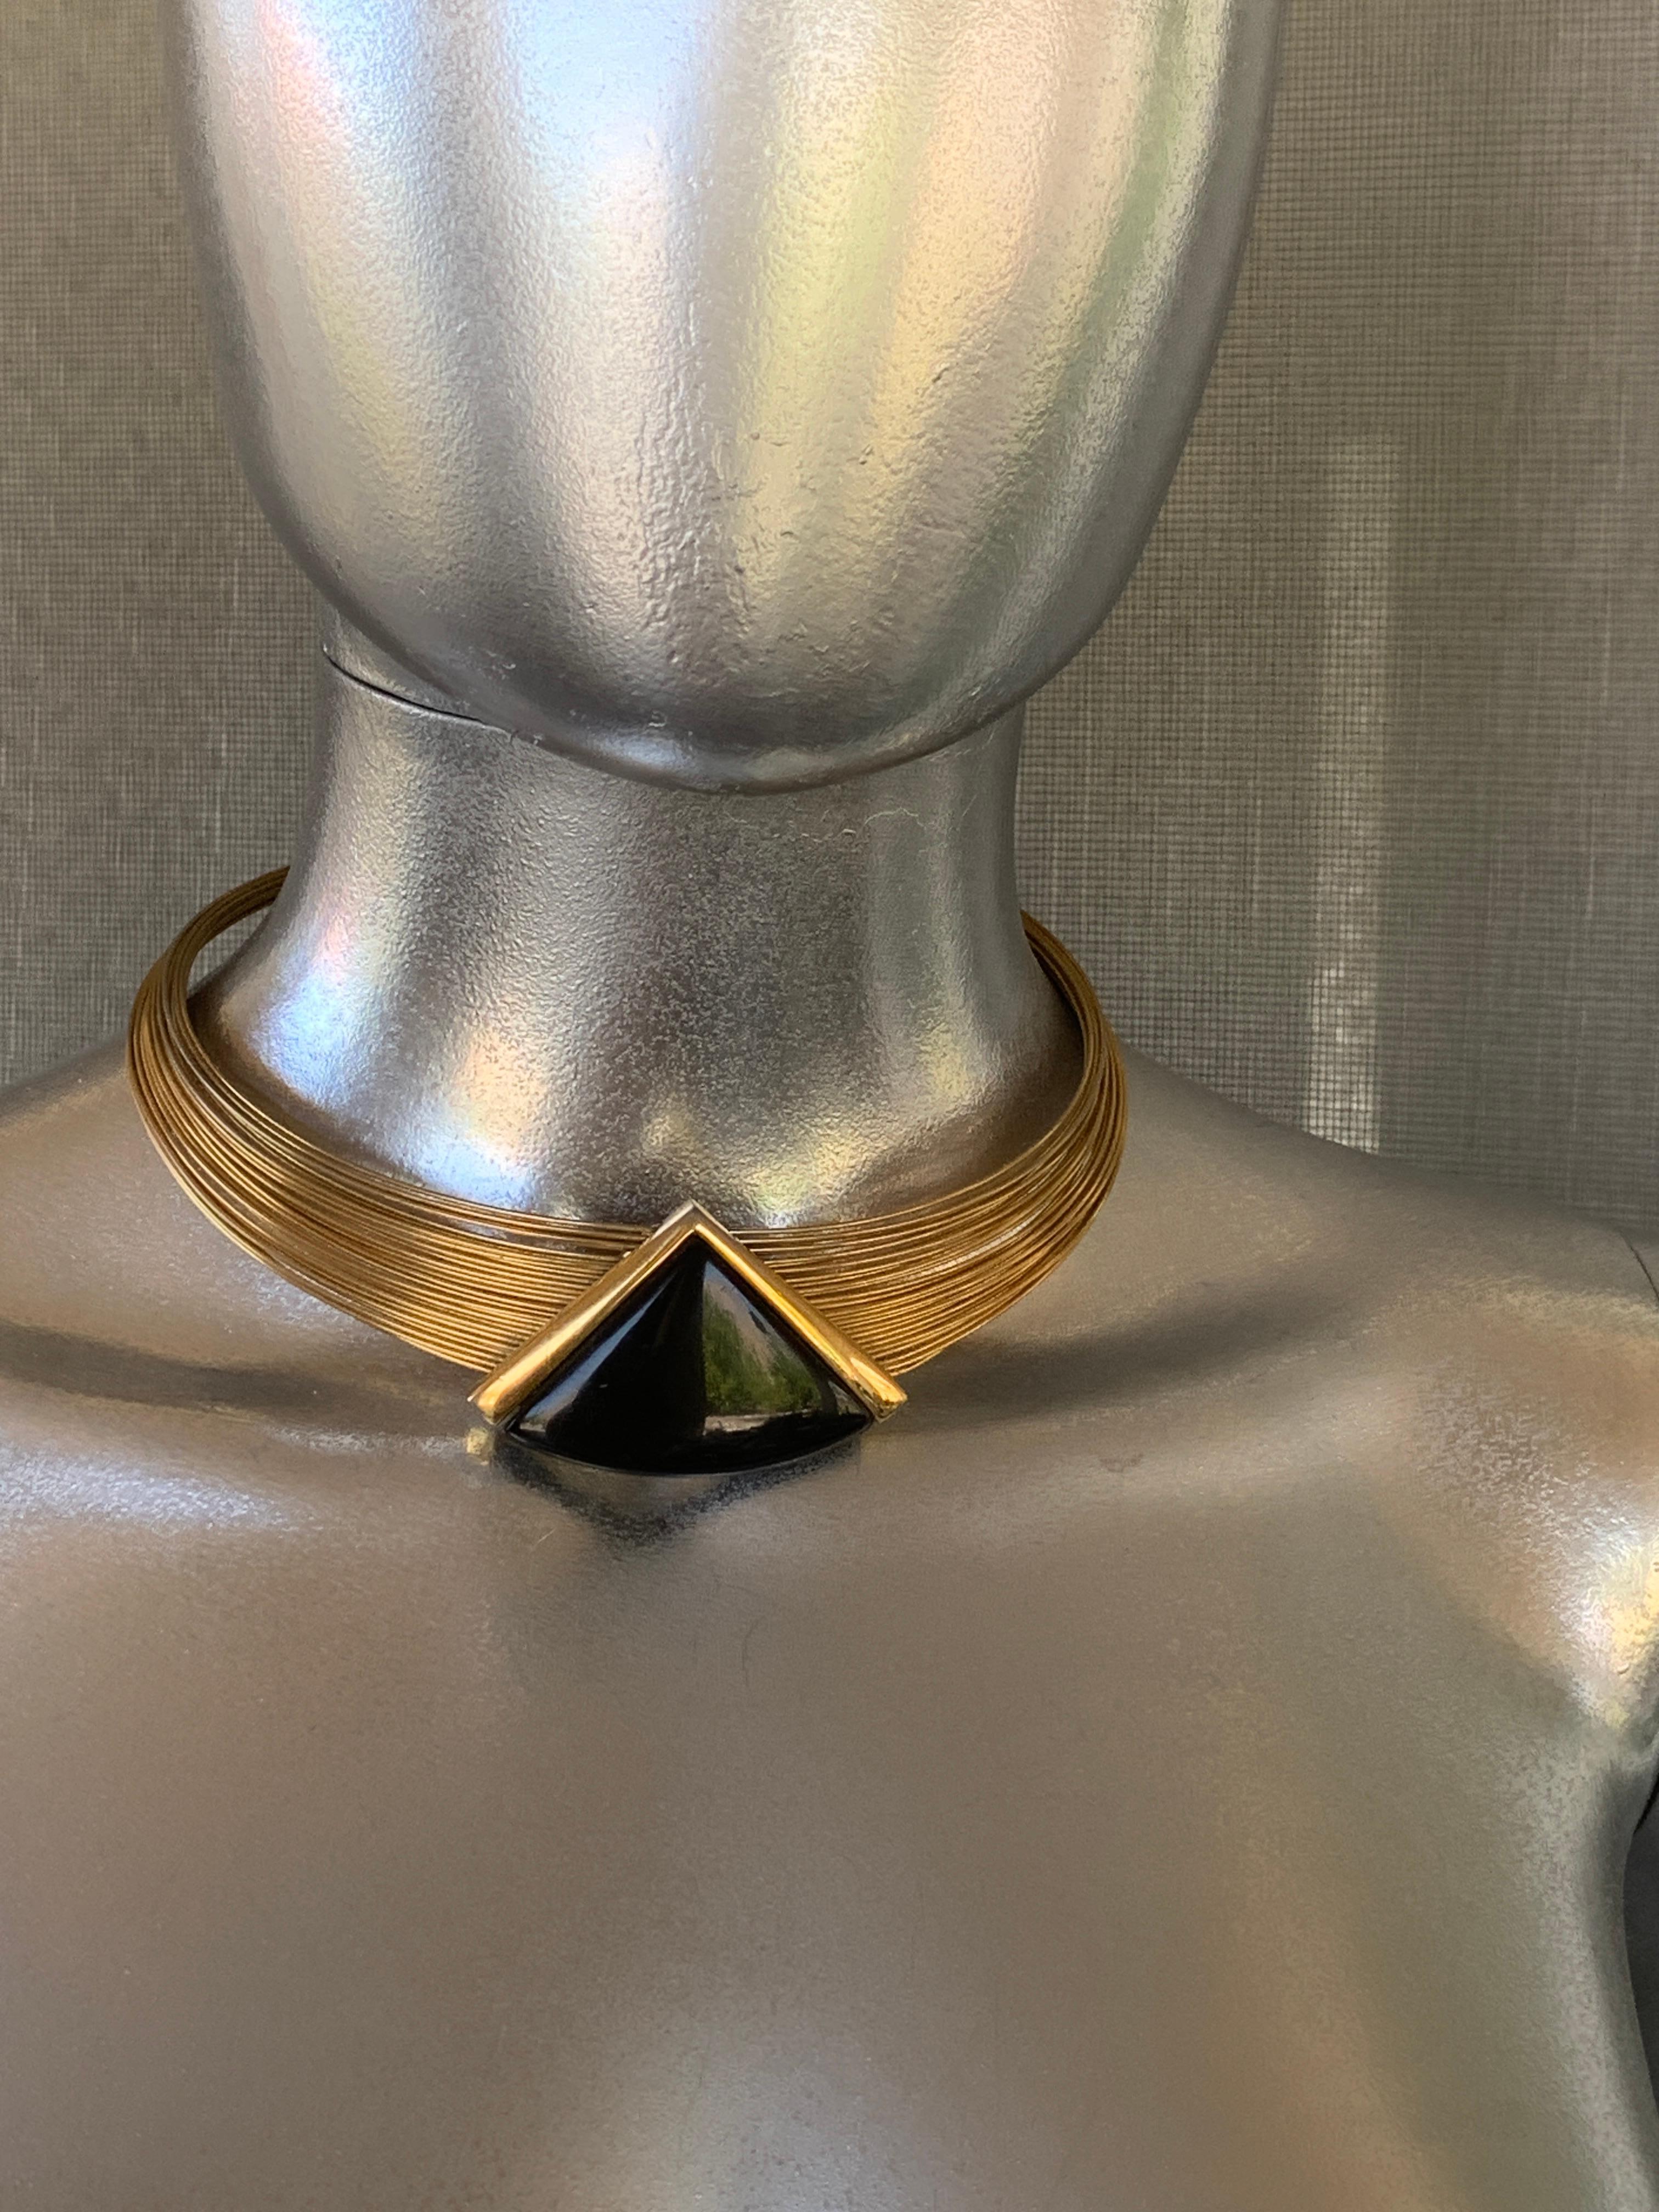 Just so modern! Napier designed some Modernist jewelry that is highly collectible and desired by many collectors. This 1980s beauty is a modernist choker that looks like gold wire. The gold plated wire is firm and easily held around the neck. The